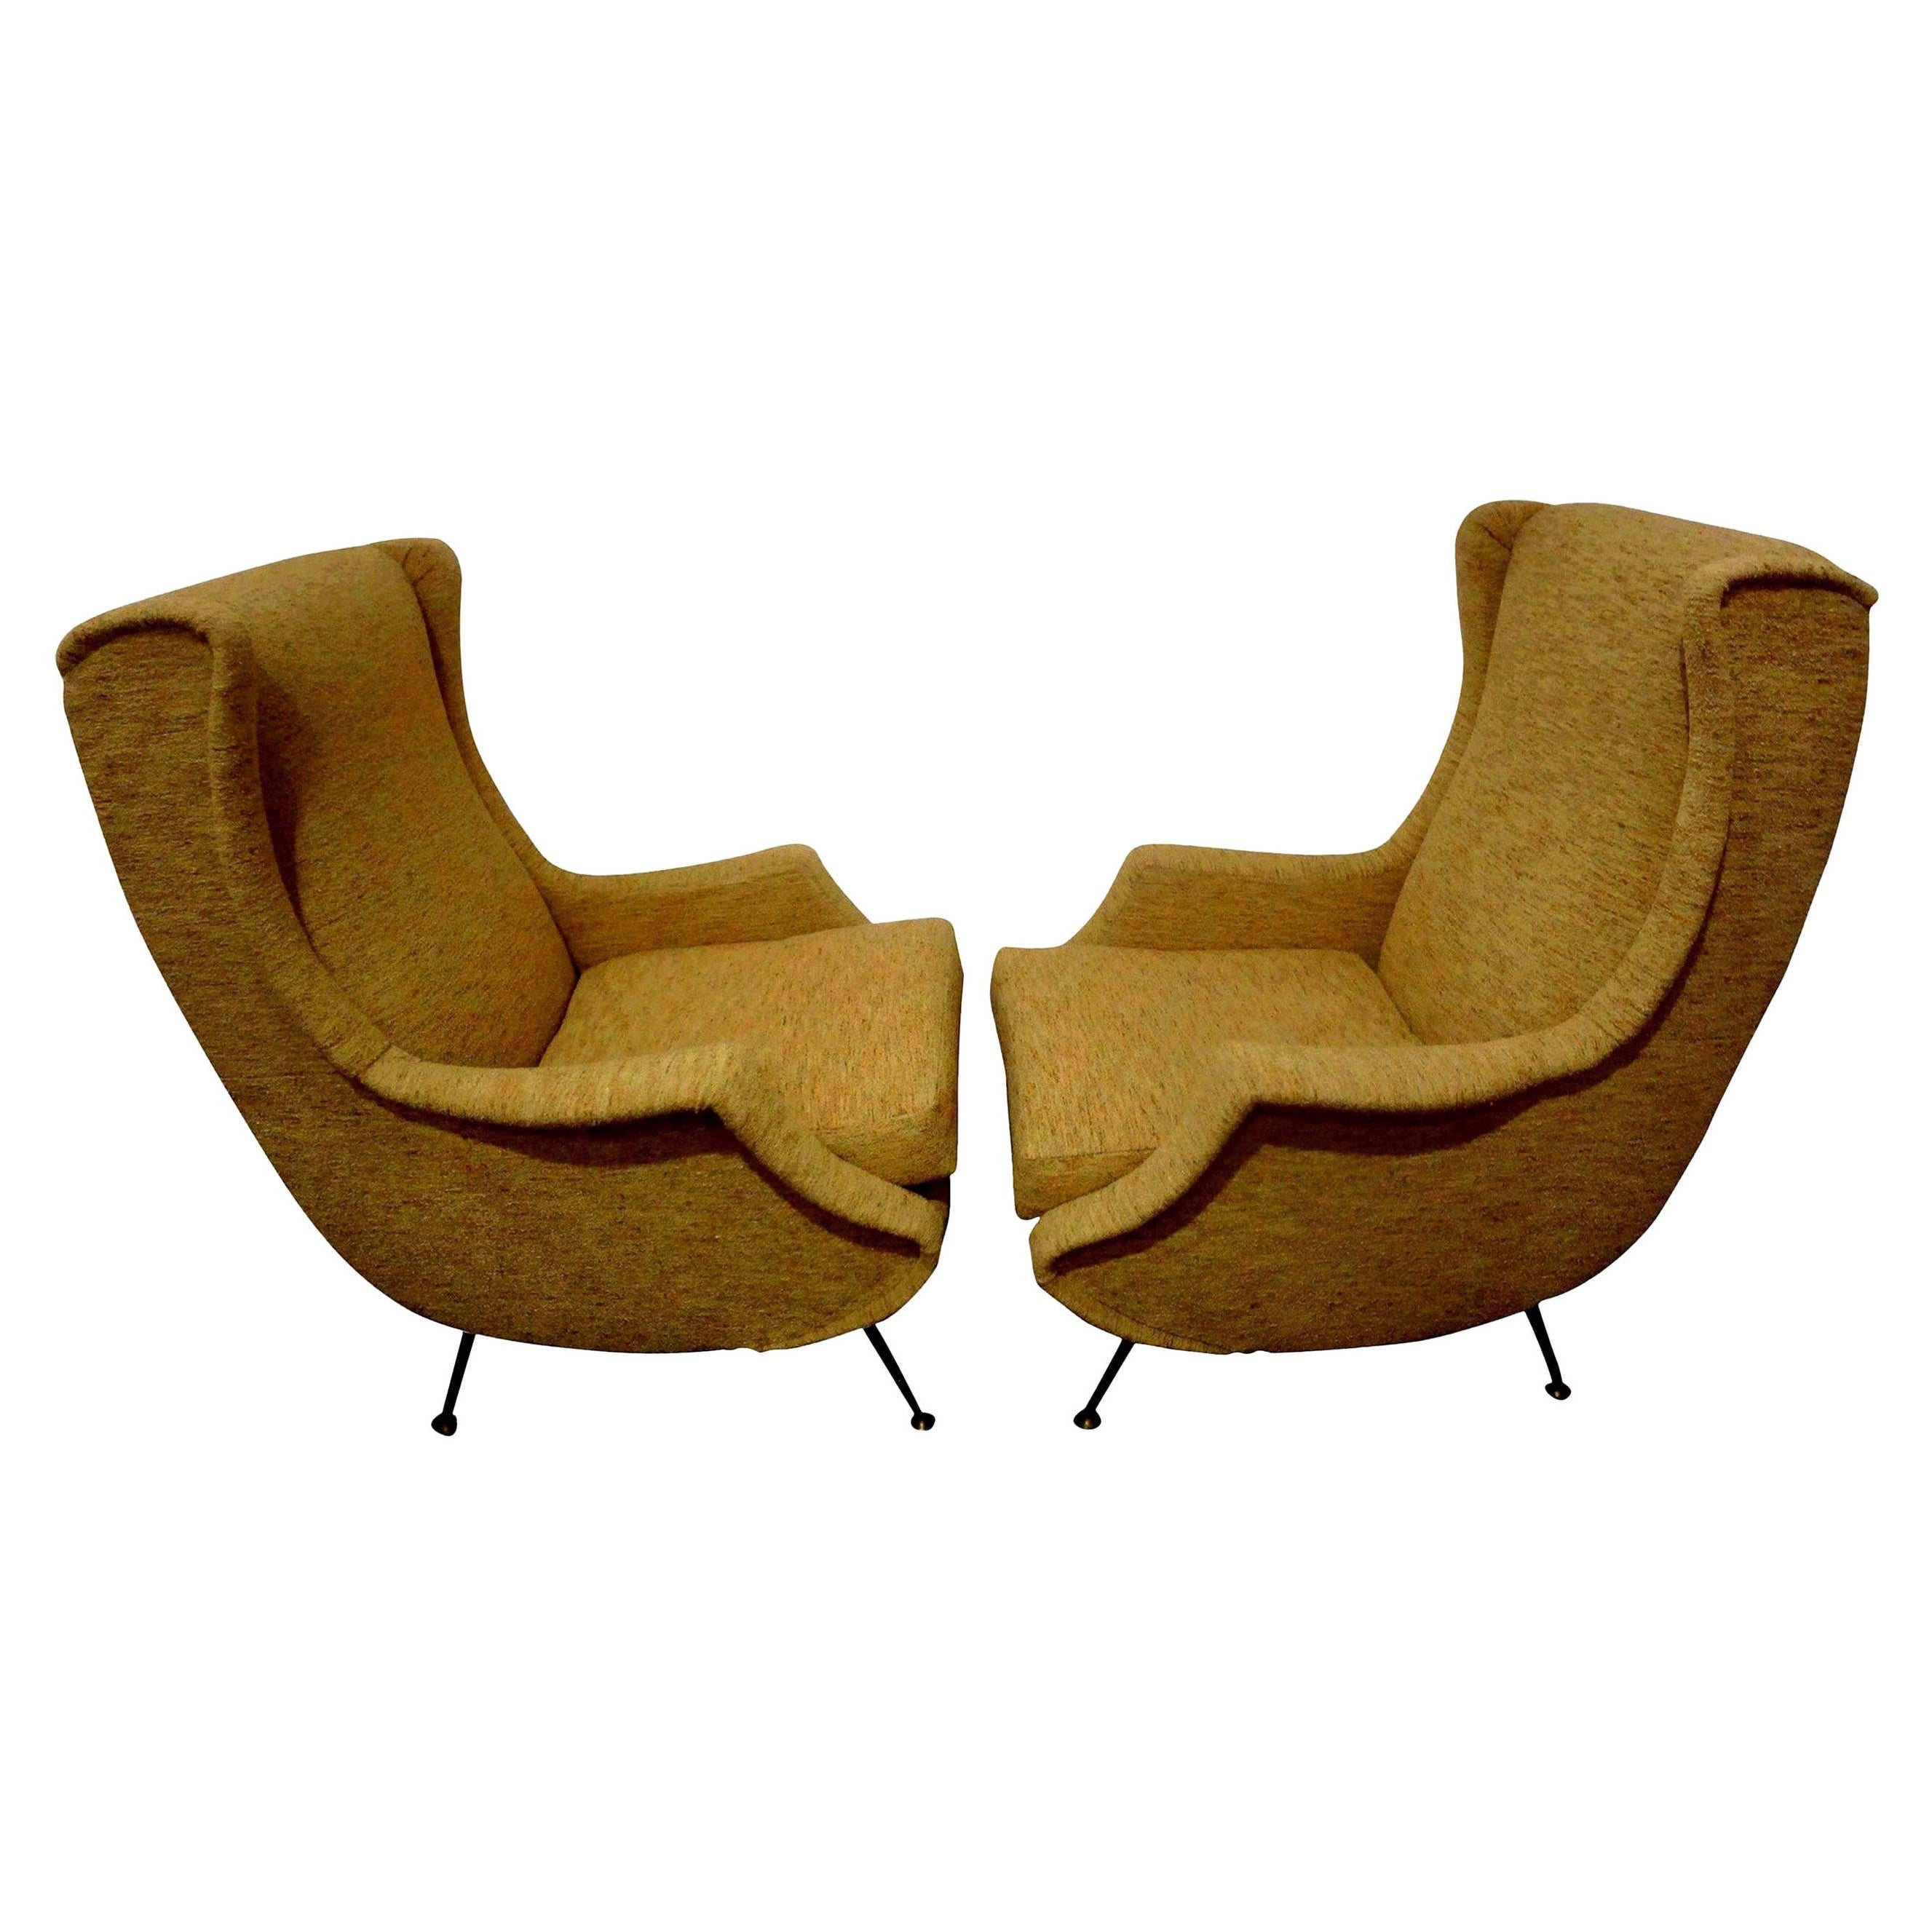 Pair of Italian Mid-Century Lounge Chairs Inspired by Gio Ponti